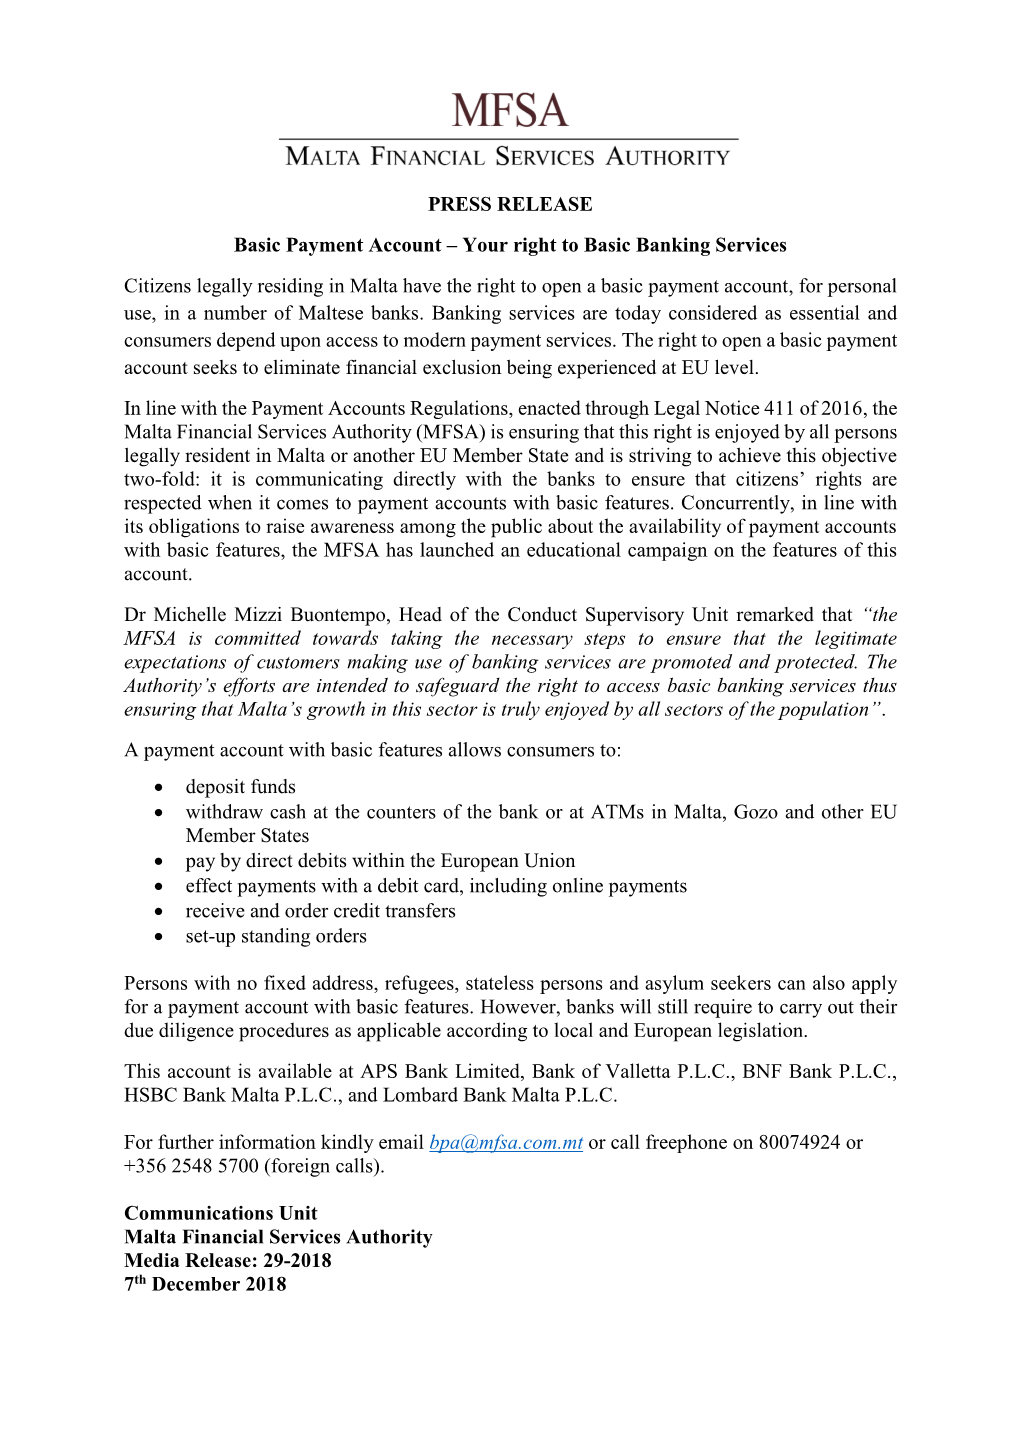 PRESS RELEASE Basic Payment Account – Your Right to Basic